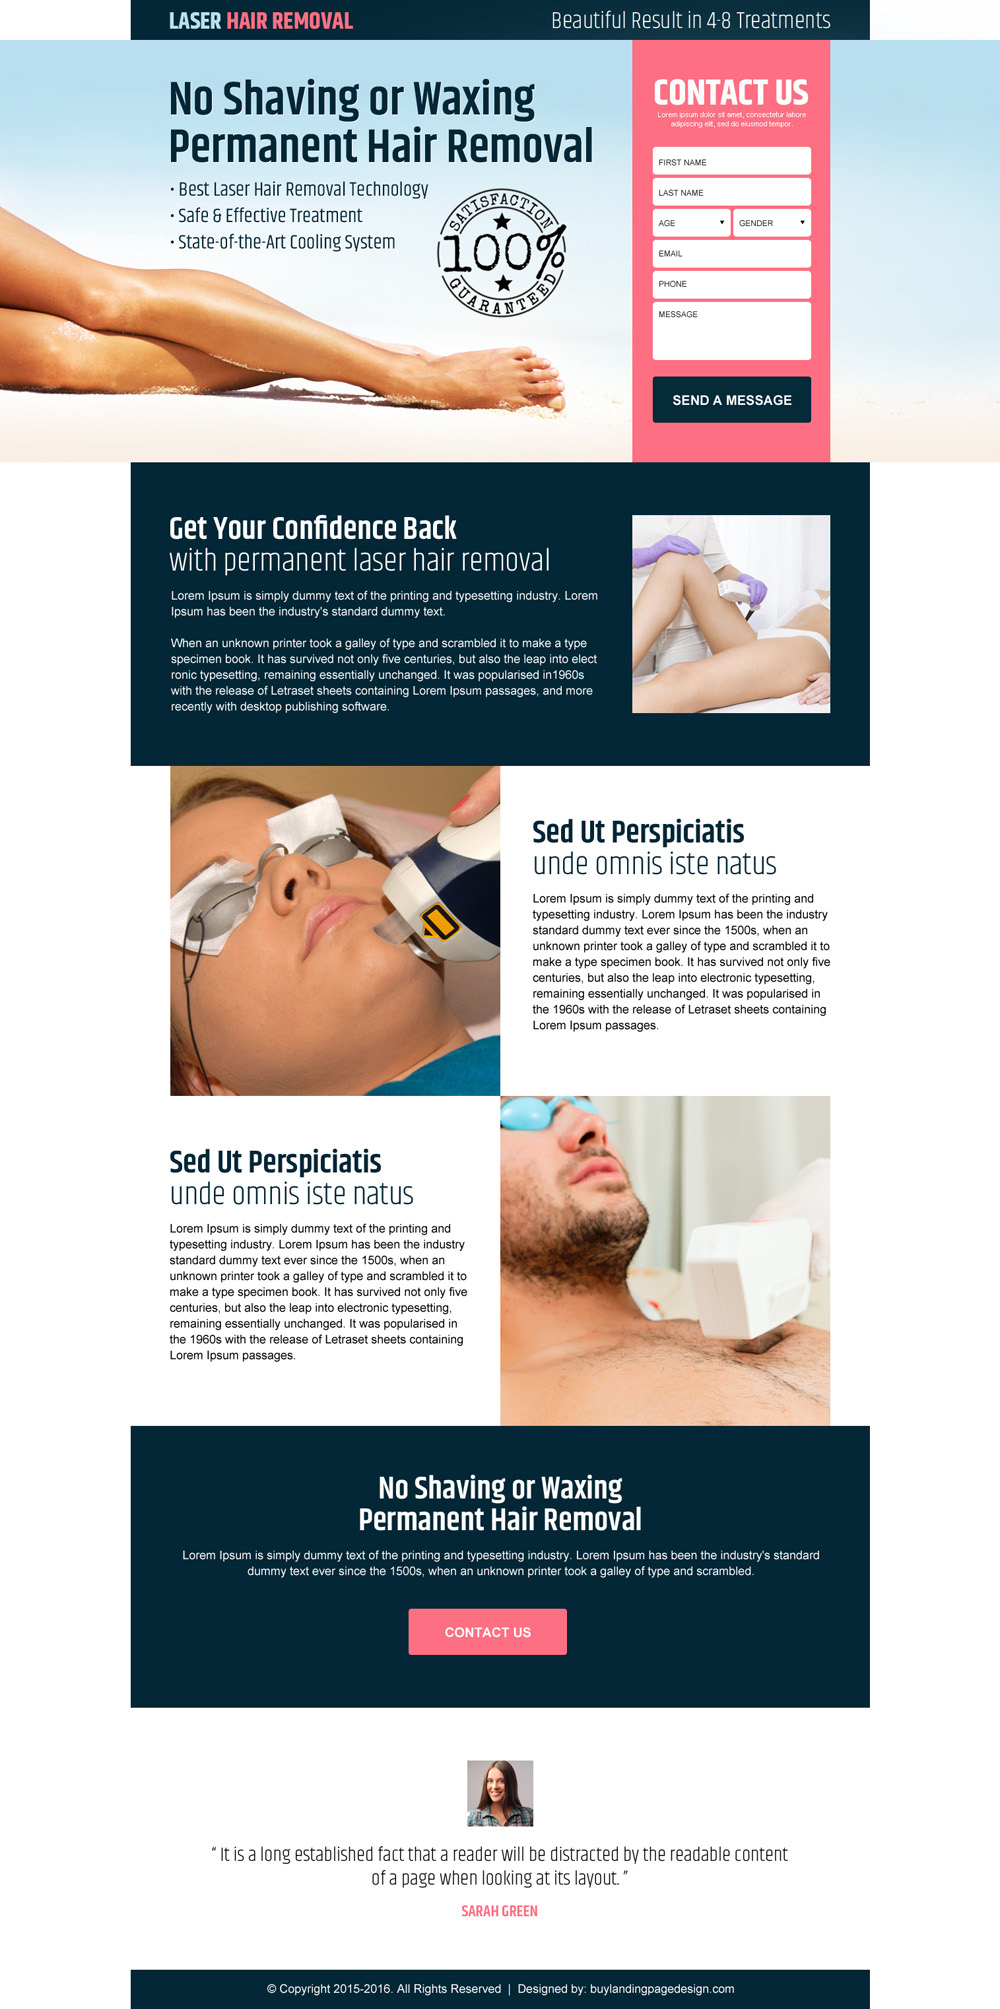 laser-hair-removal-service-lead-generation-converting-landing-page-design-001